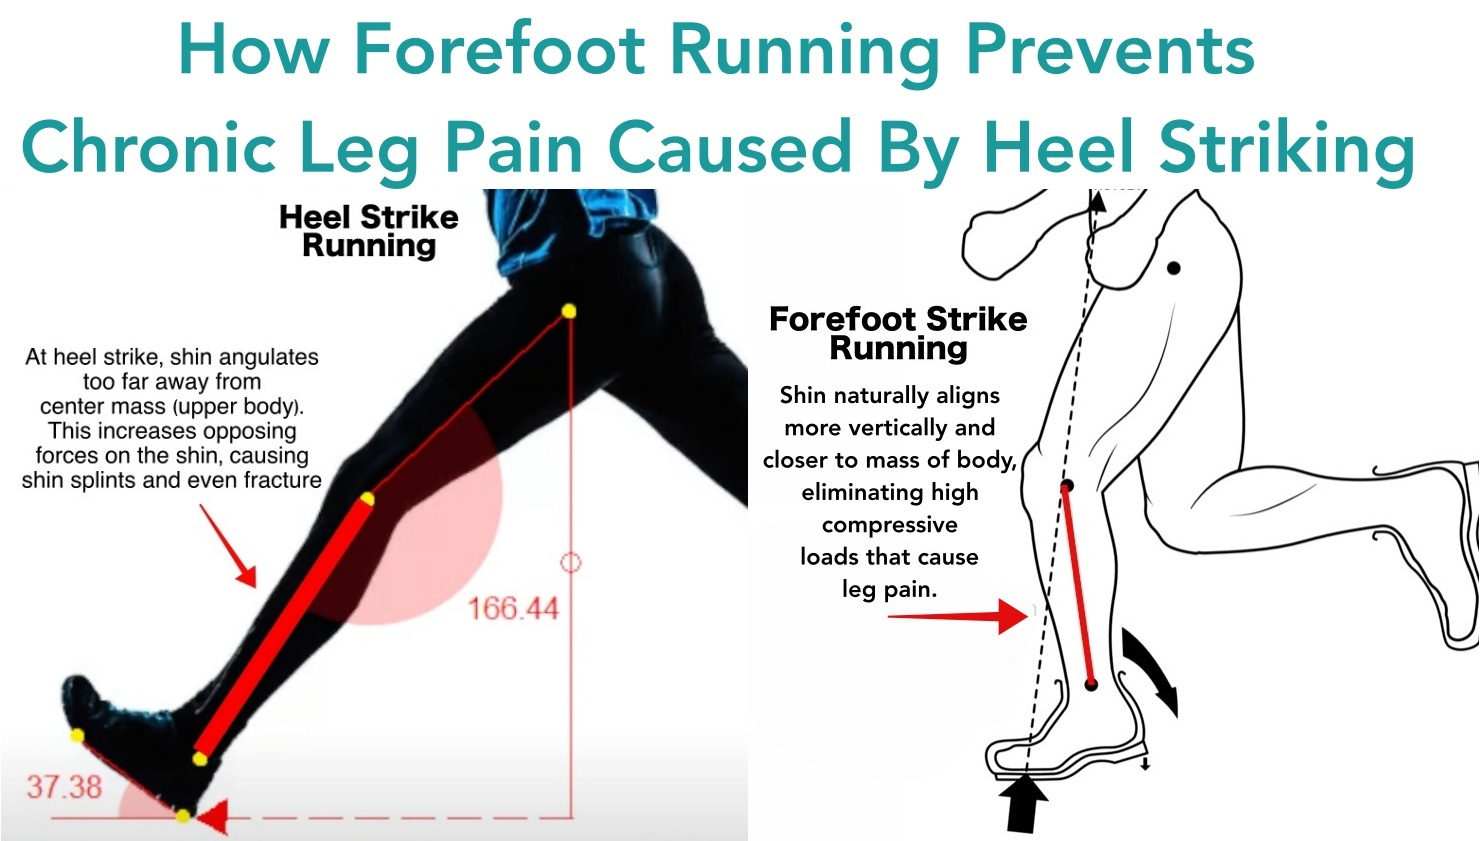 Is Forefoot Running Better for Your Legs than Heel Strike Running? Yes!